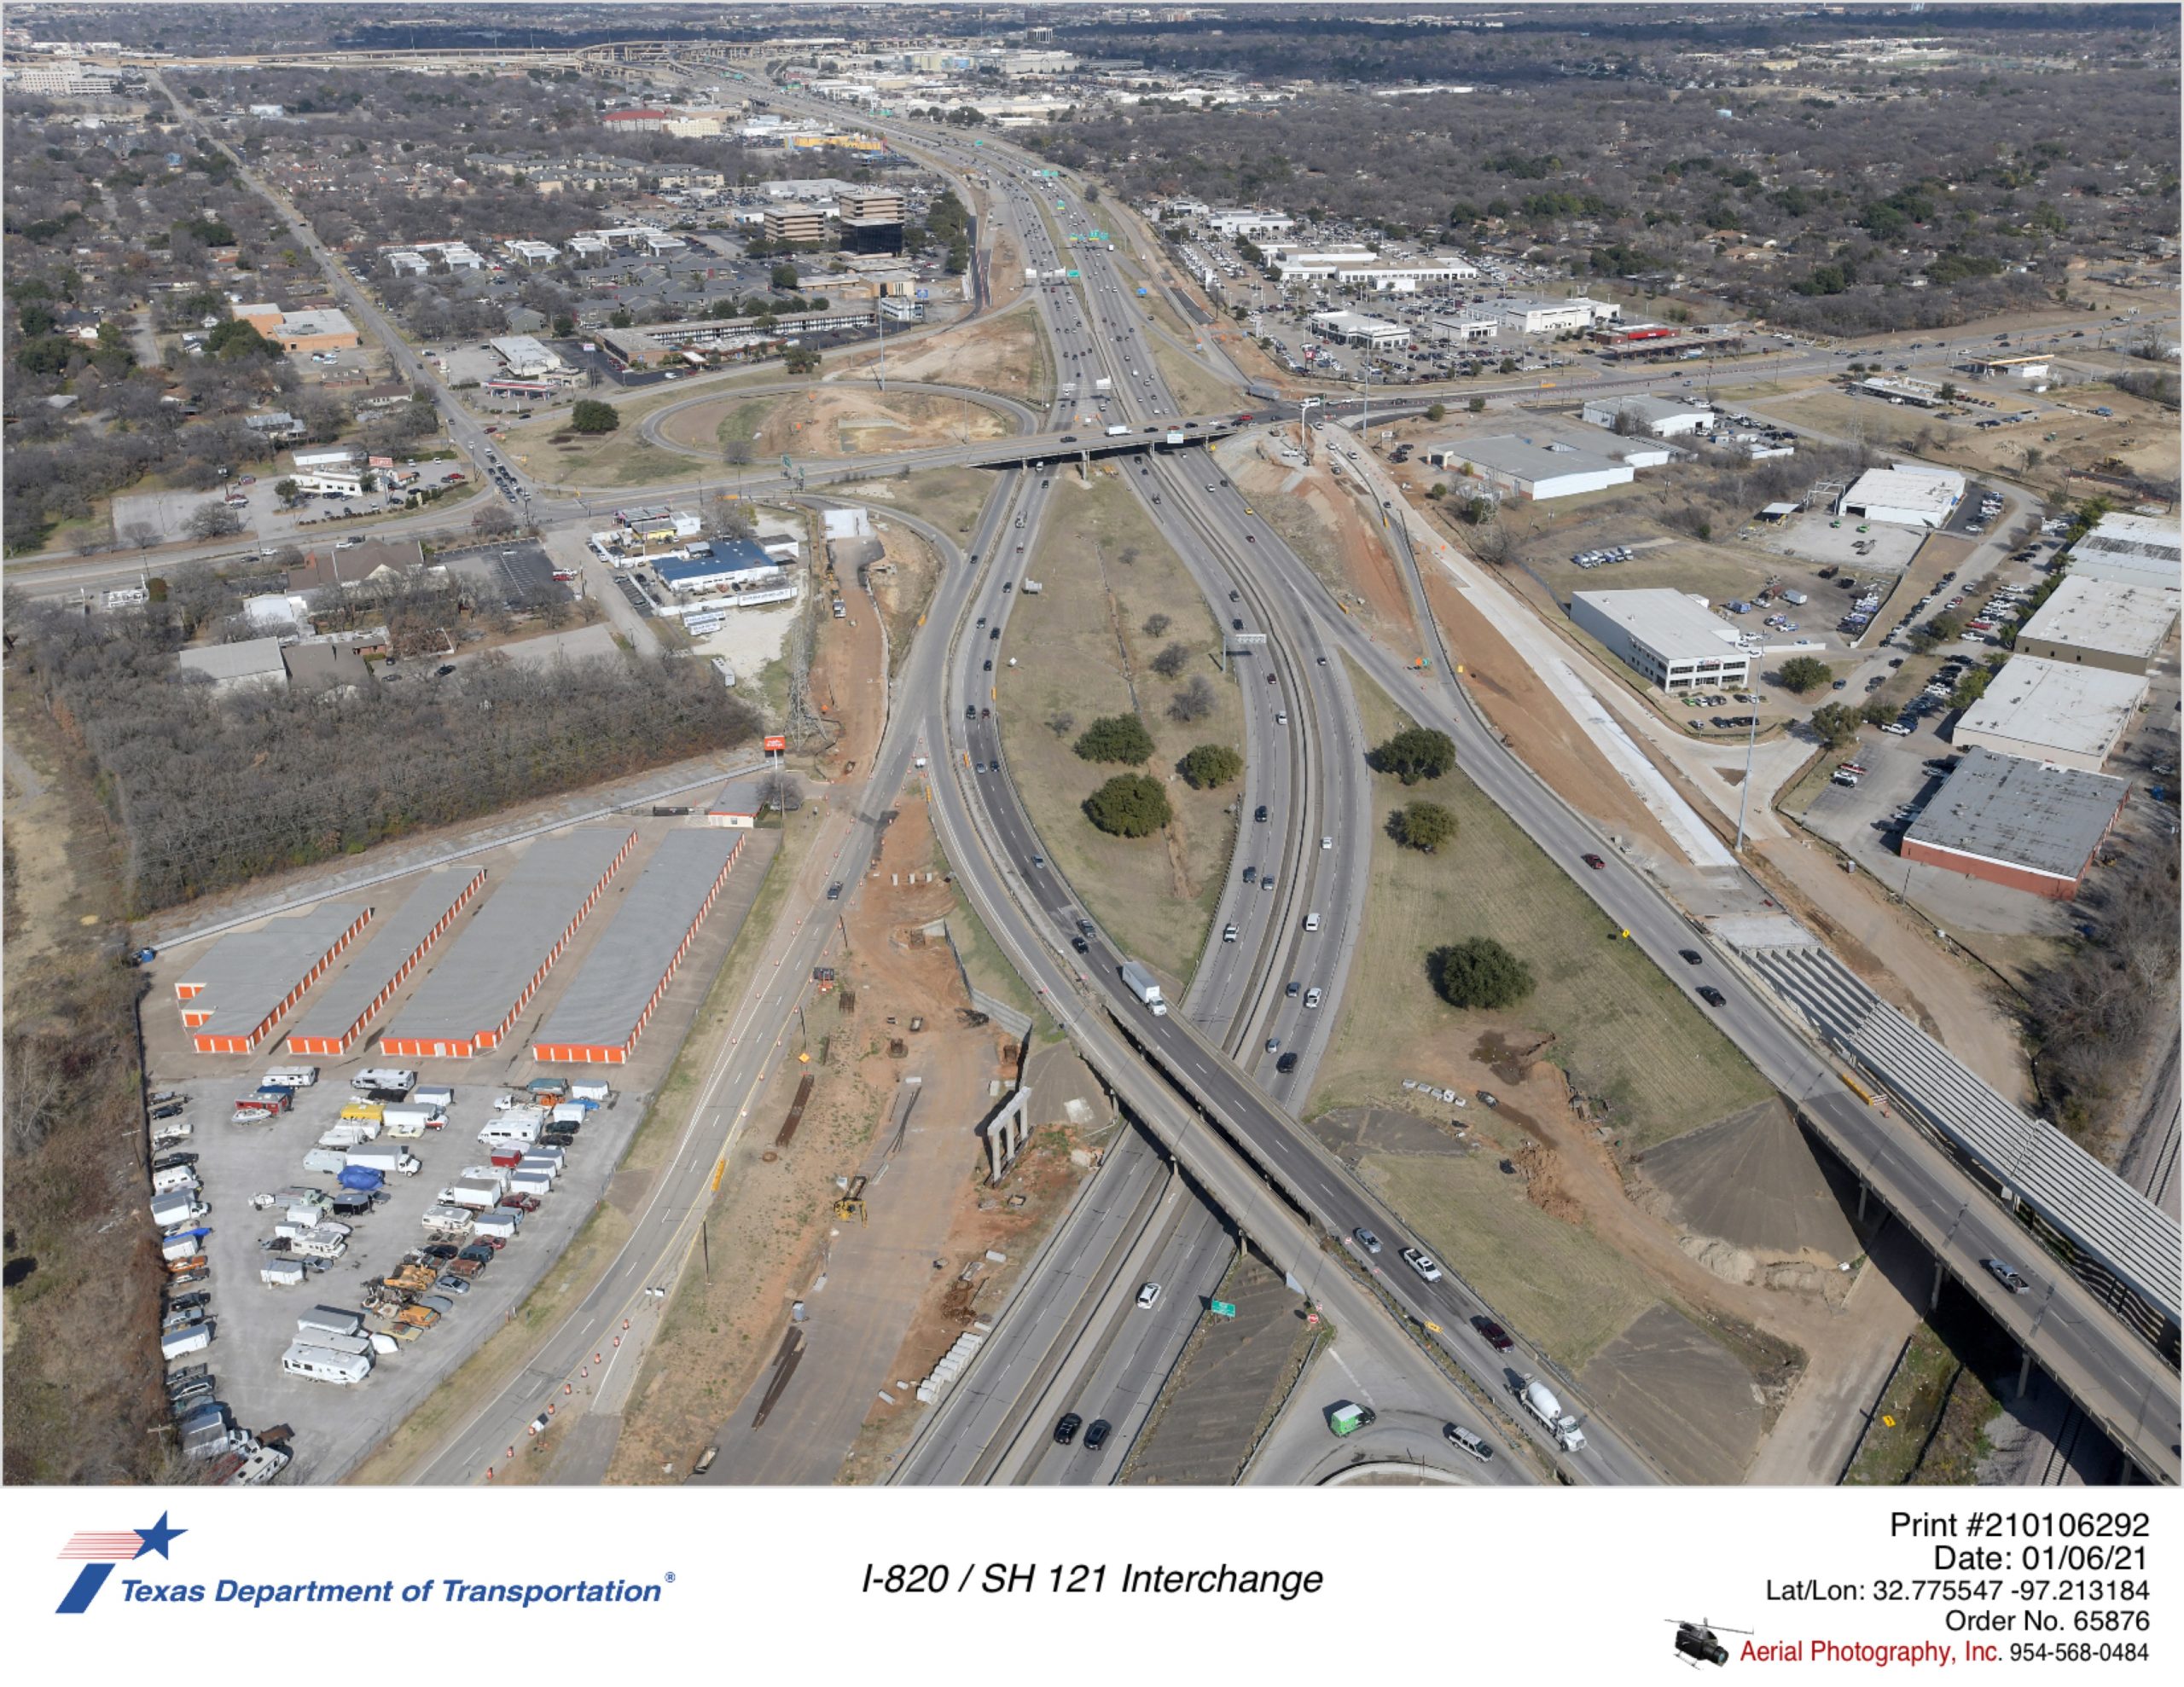 I-820/SH 121 interchange looking north. Construction of new I-820 frontage road north of Trinity Rail Express and new I-820 southbound structure at SH 121 is shown.